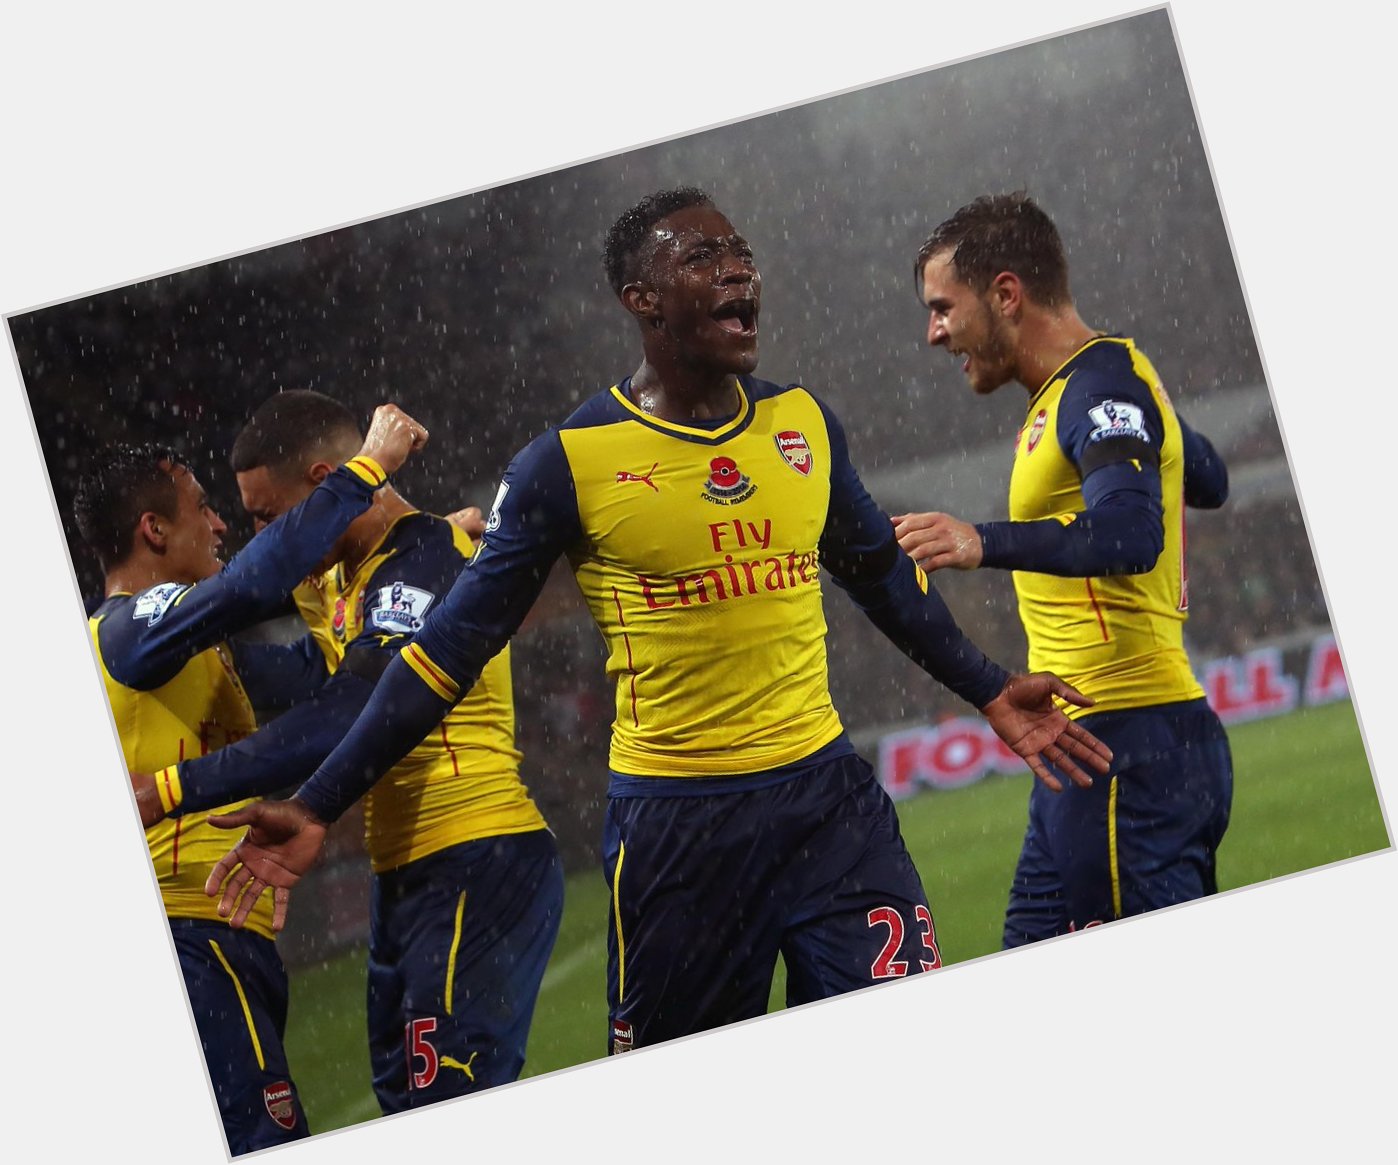  striker Danny Welbeck is 24 today. Can he get a goal against to celebrate? to say Happy Birthday! 